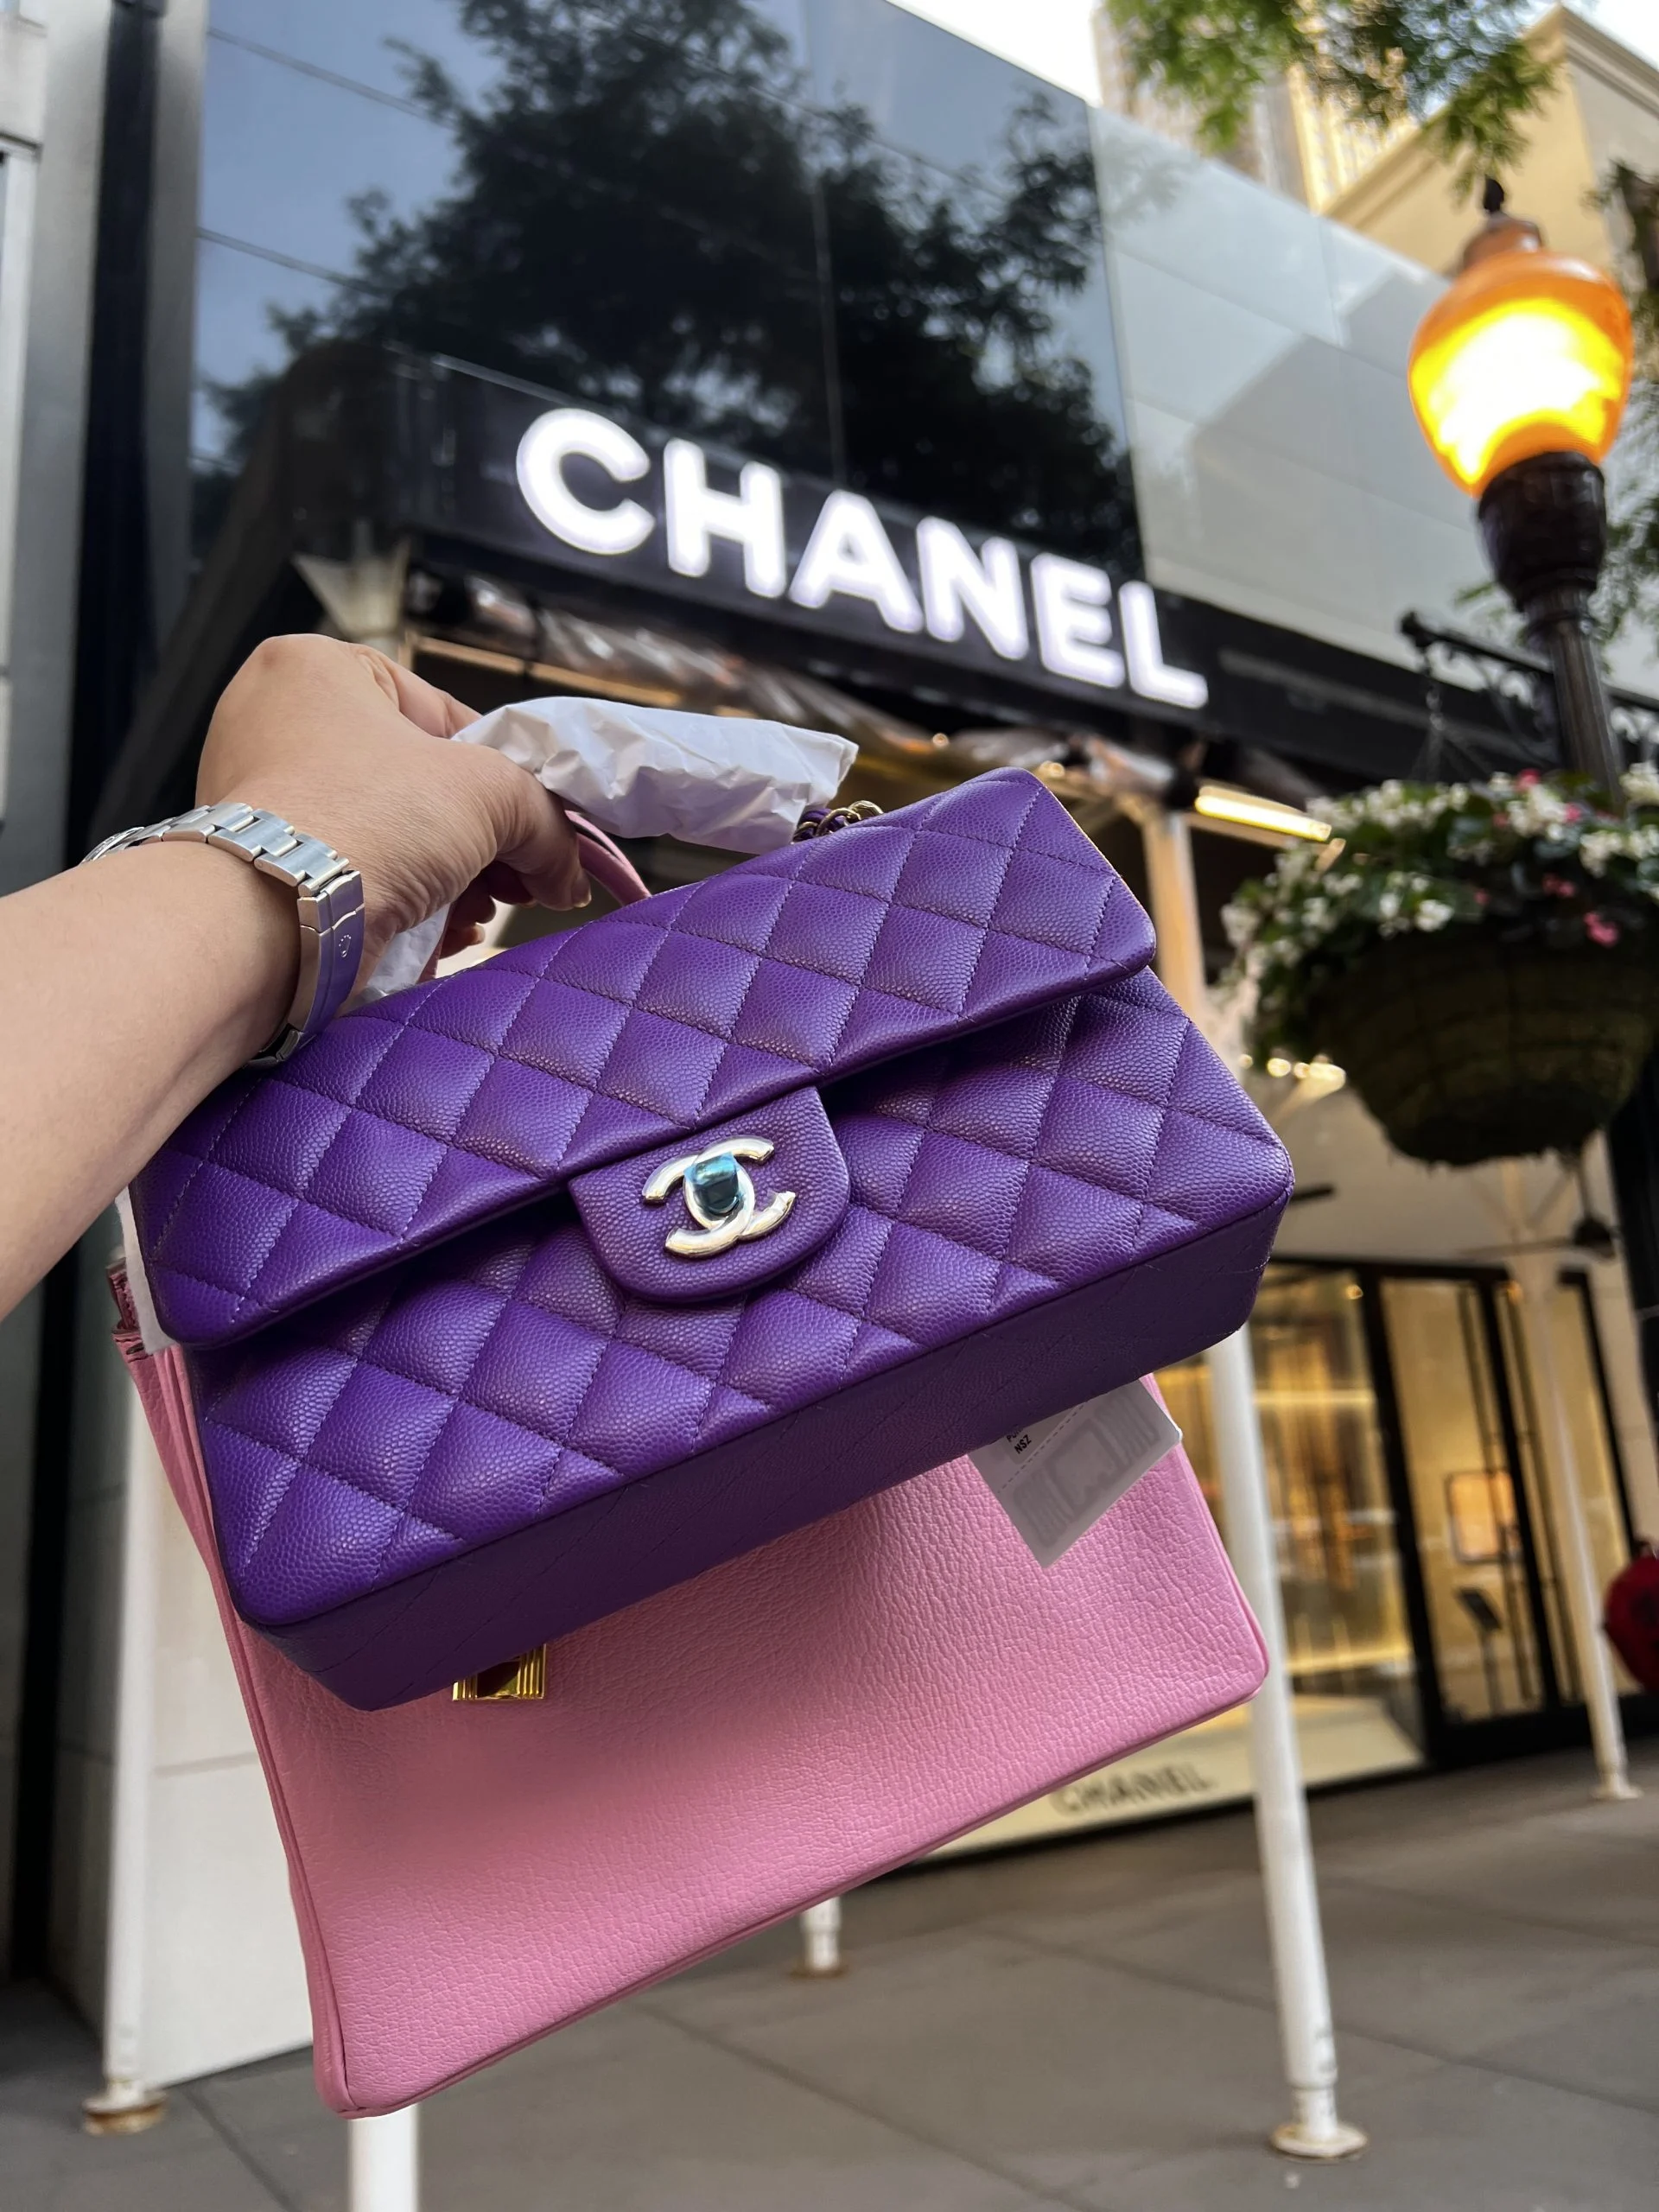 average cost of chanel bag